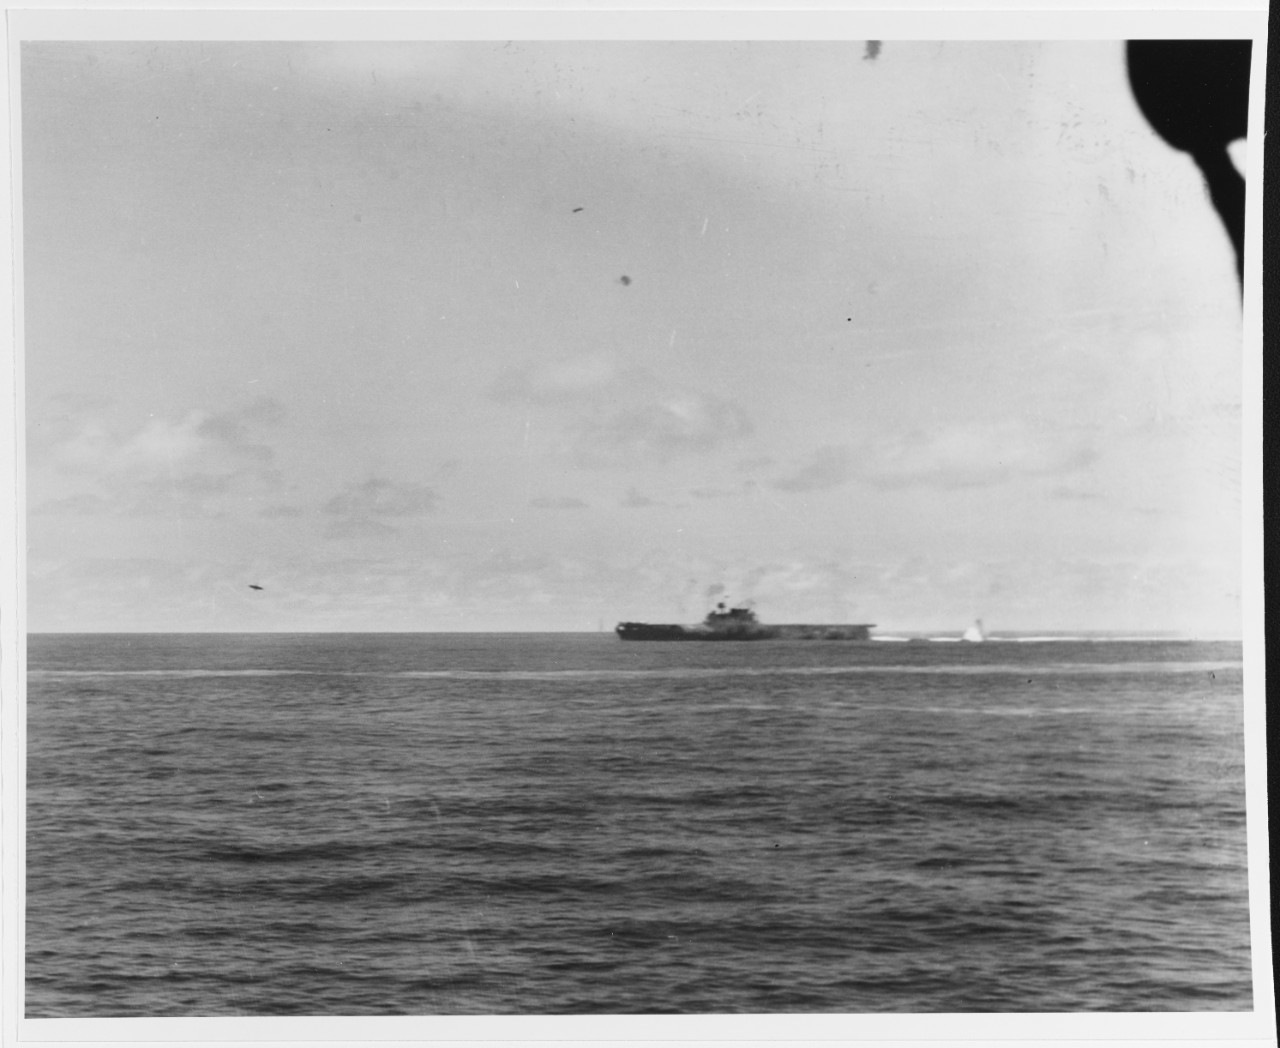 Photo #: 80-G-32355  Battle of Midway, June 1942